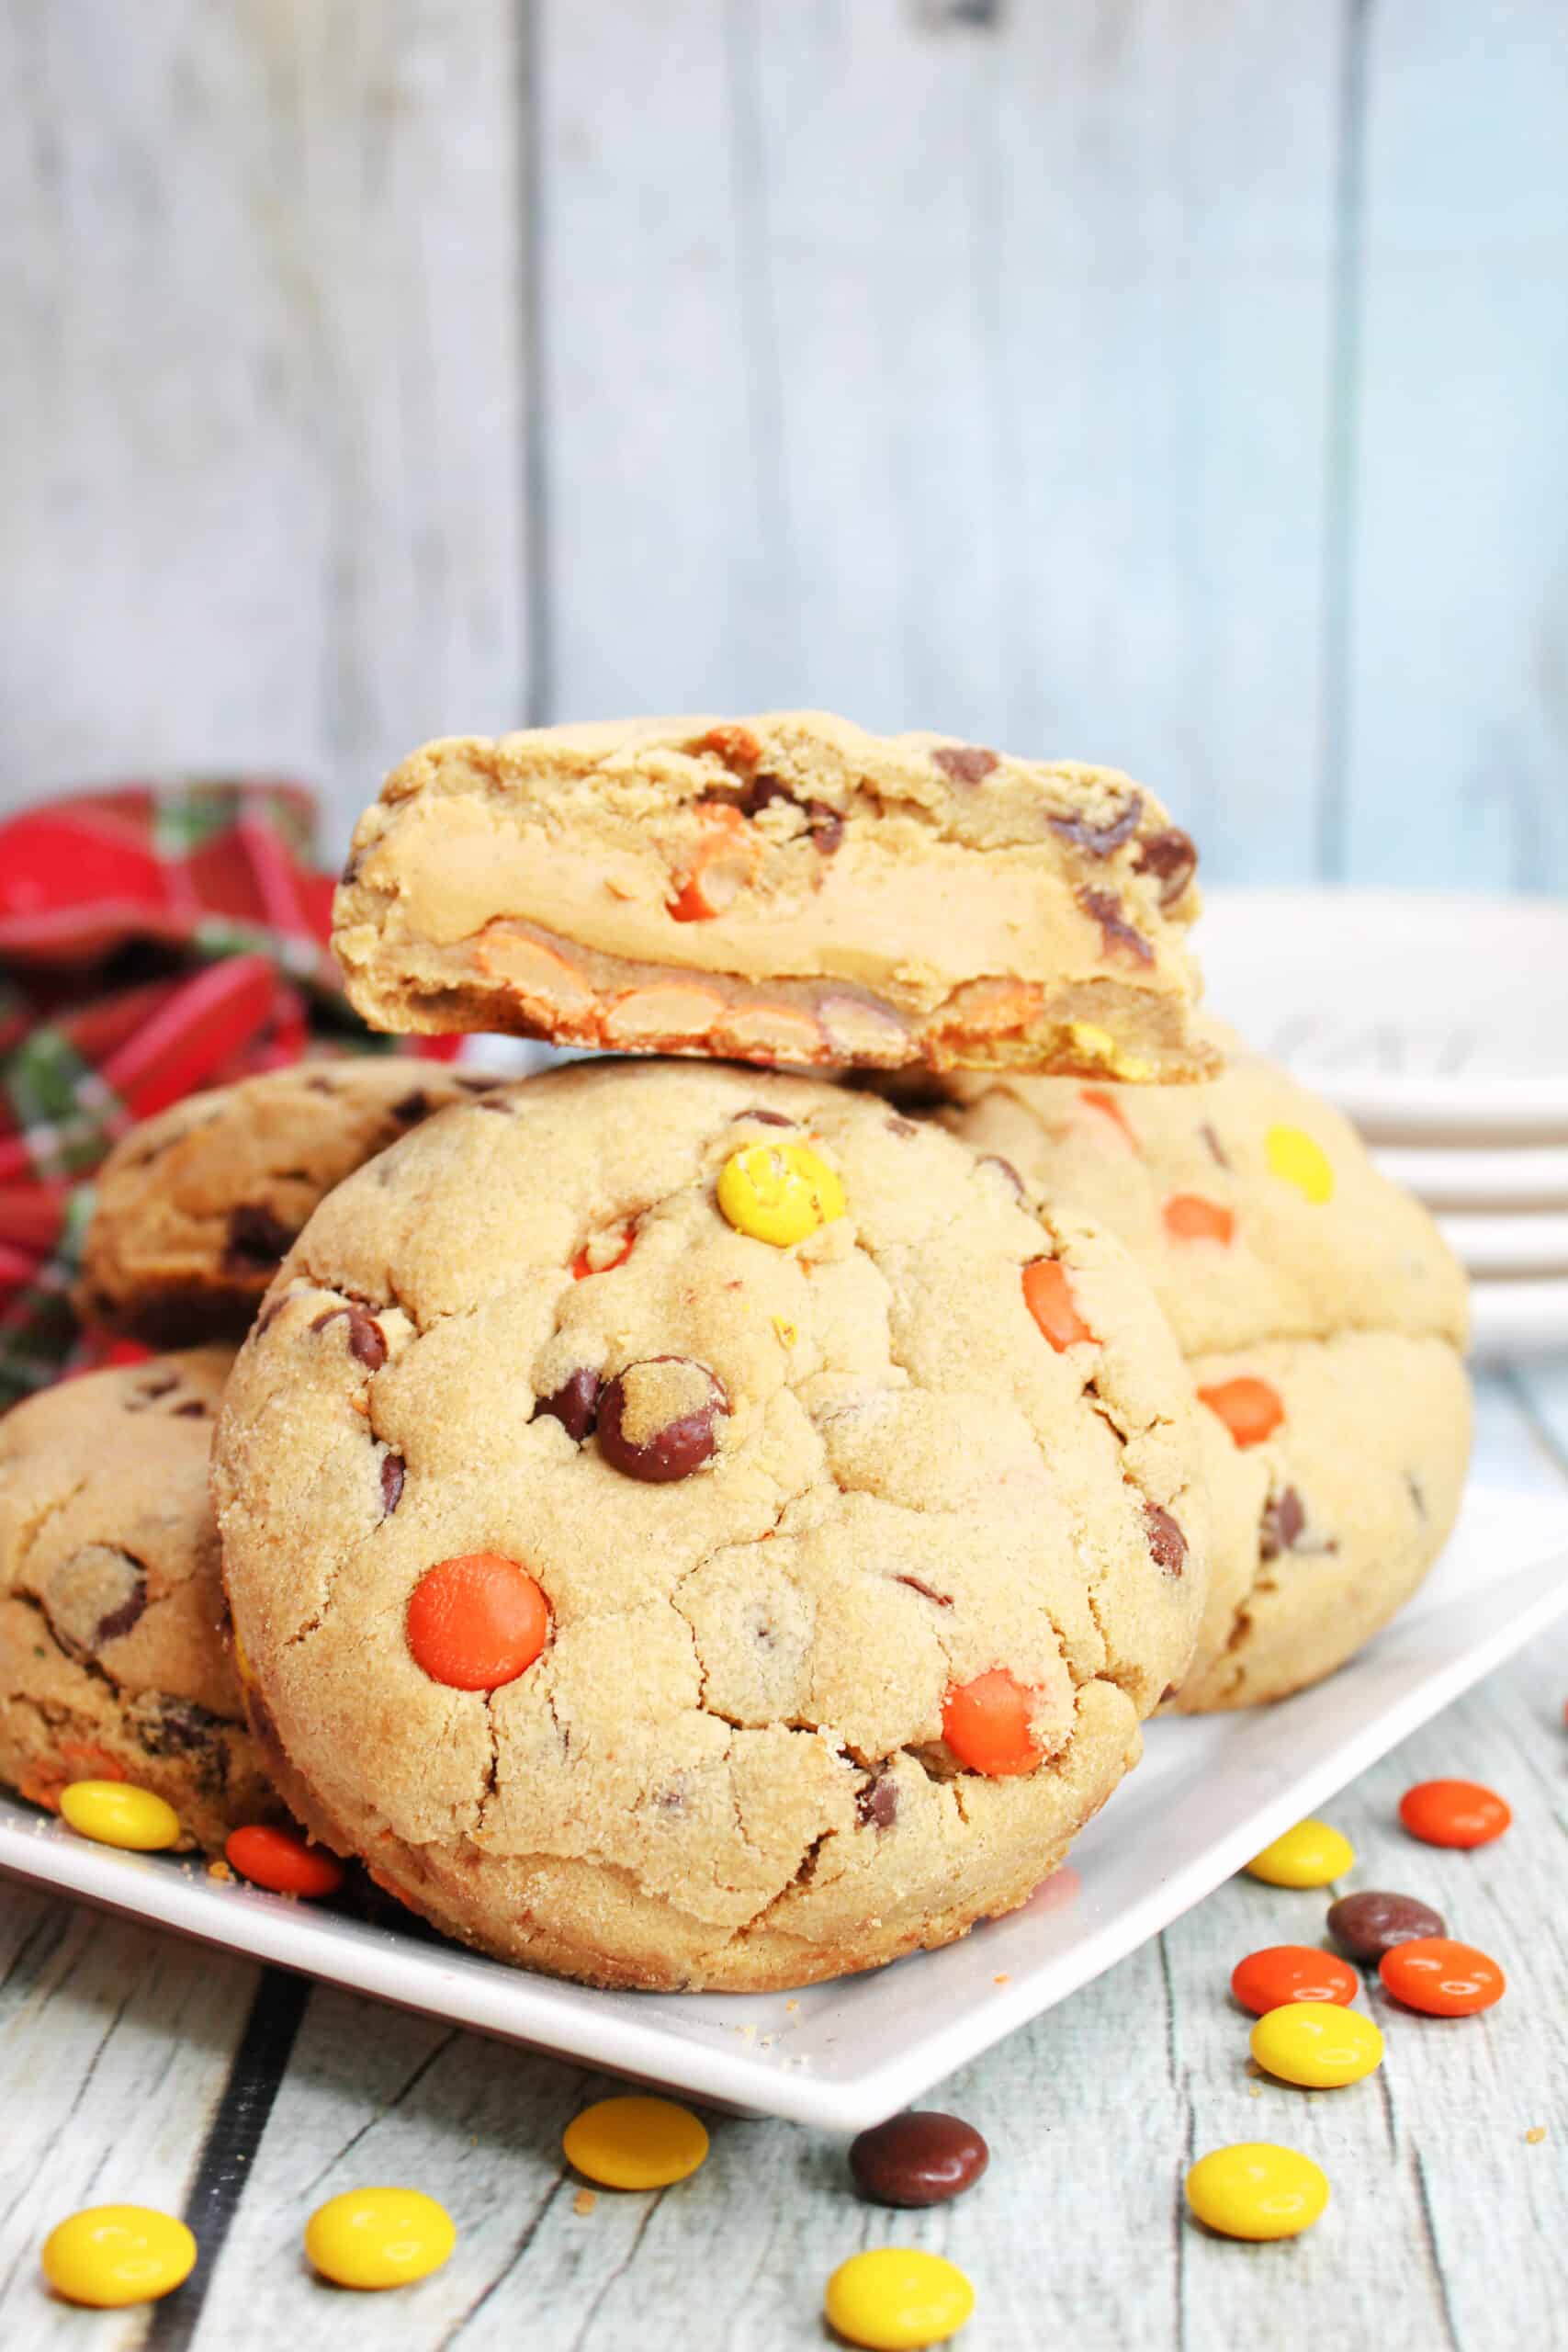 Reese's Peanut Butter Filled Cookies